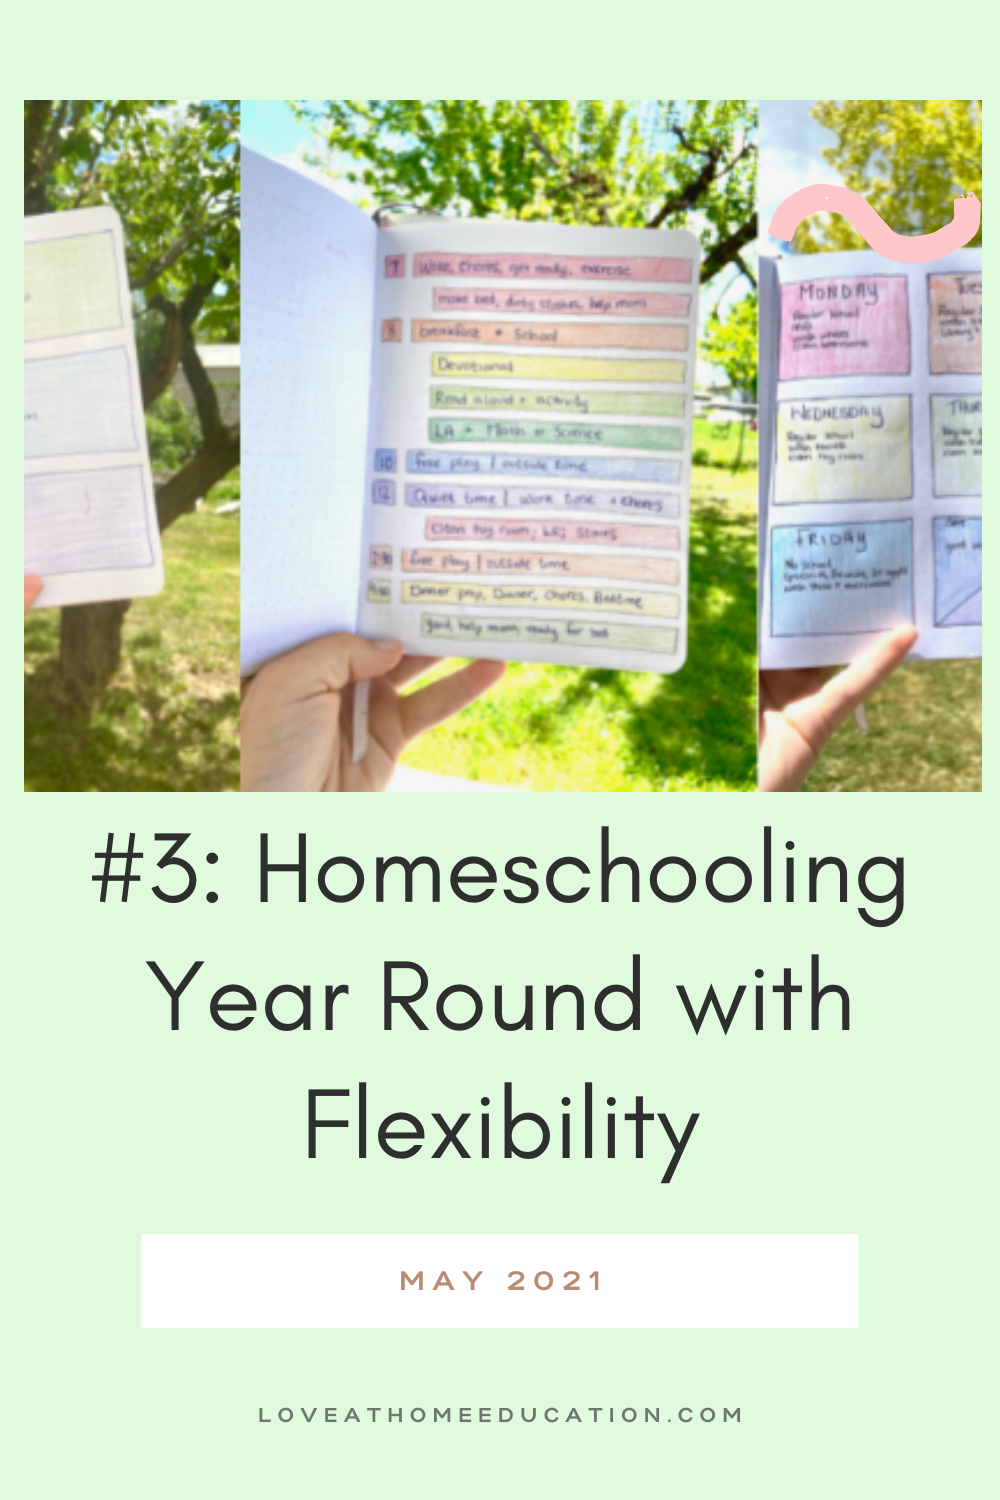 Homeschooling Year Round with Flexibility